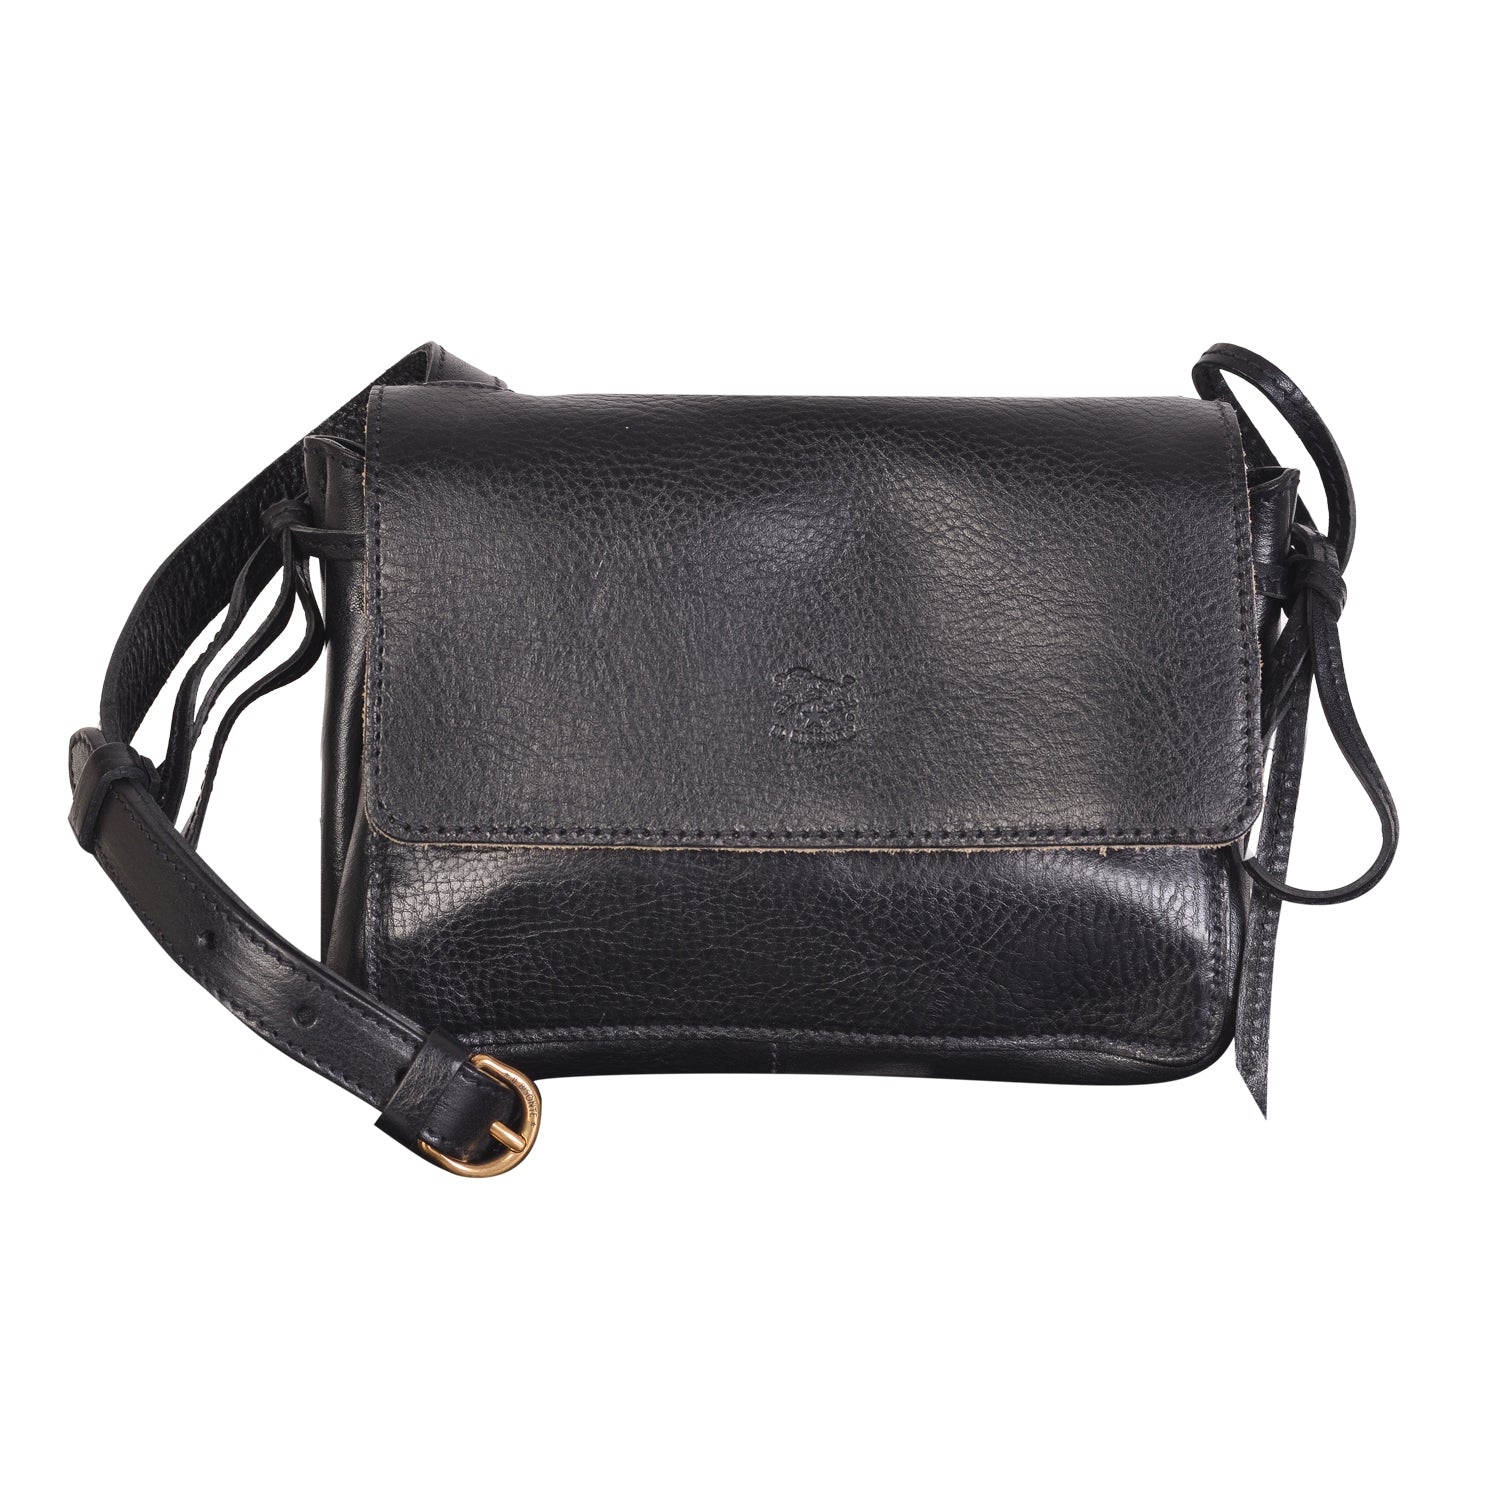 NEW IL BISONTE WOMEN'S SOFFIETTO COLLECTION CROSSBODY BAG IN BLACK LEATHER